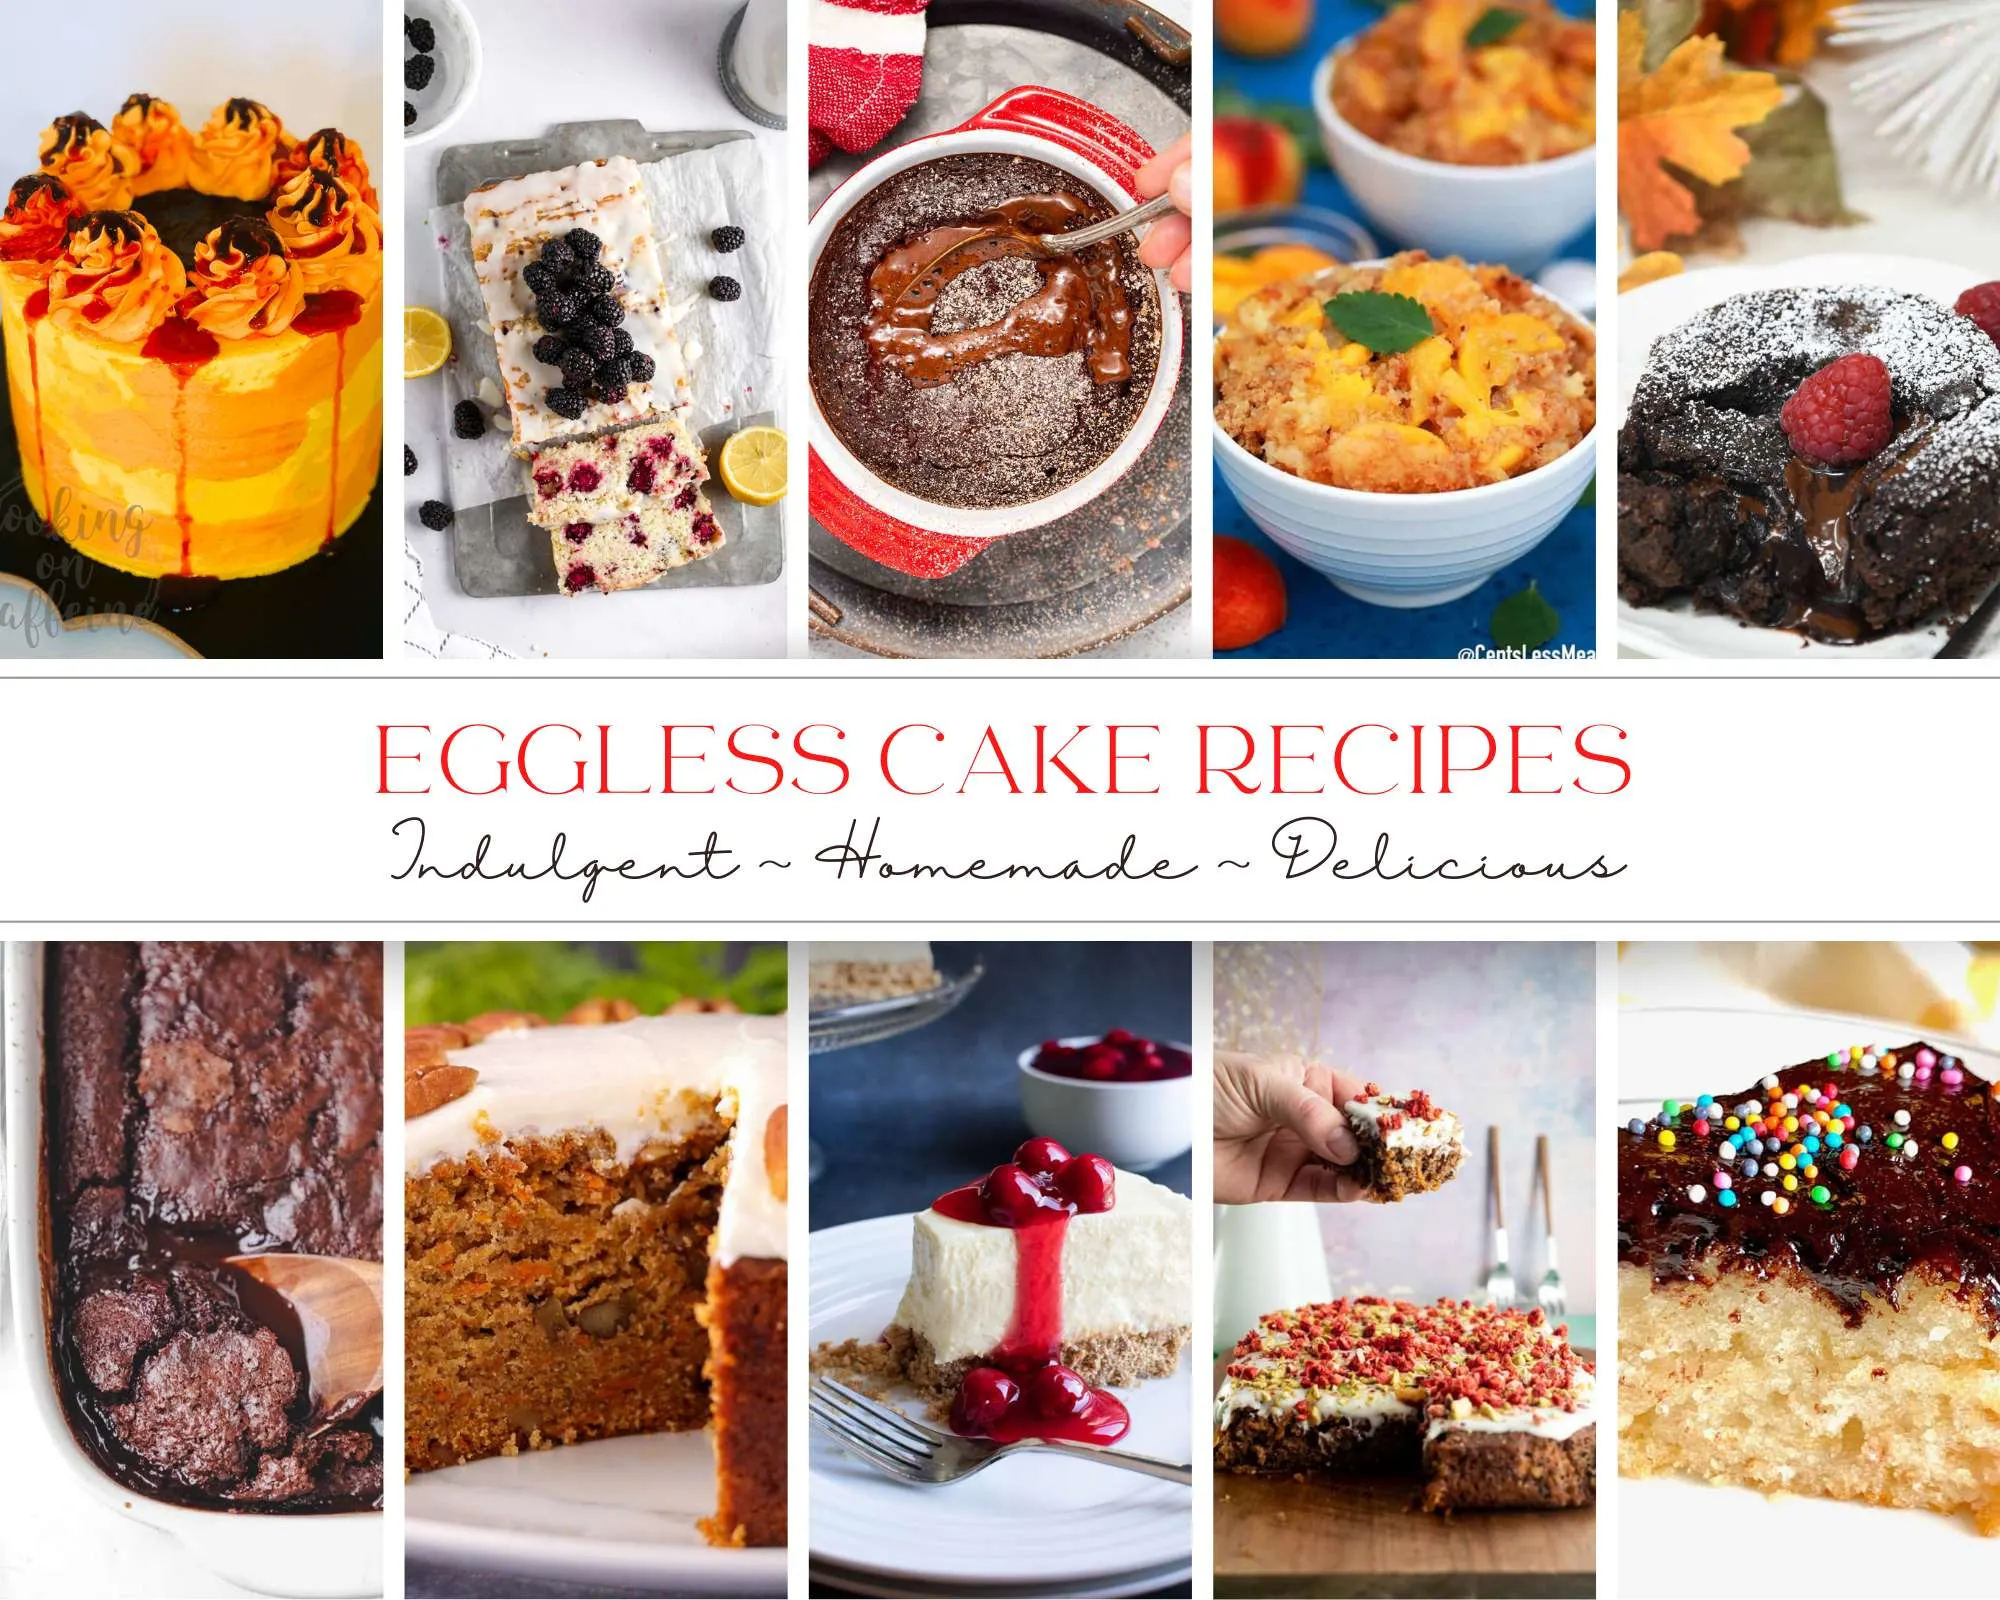 Buy Cake Recipe Cookbook: More Than 50 Delicious, Simple and Most  Importantly Easy Cake Recipes for the Whole Family: 21 (Delicious Recipes)  Book Online at Low Prices in India | Cake Recipe